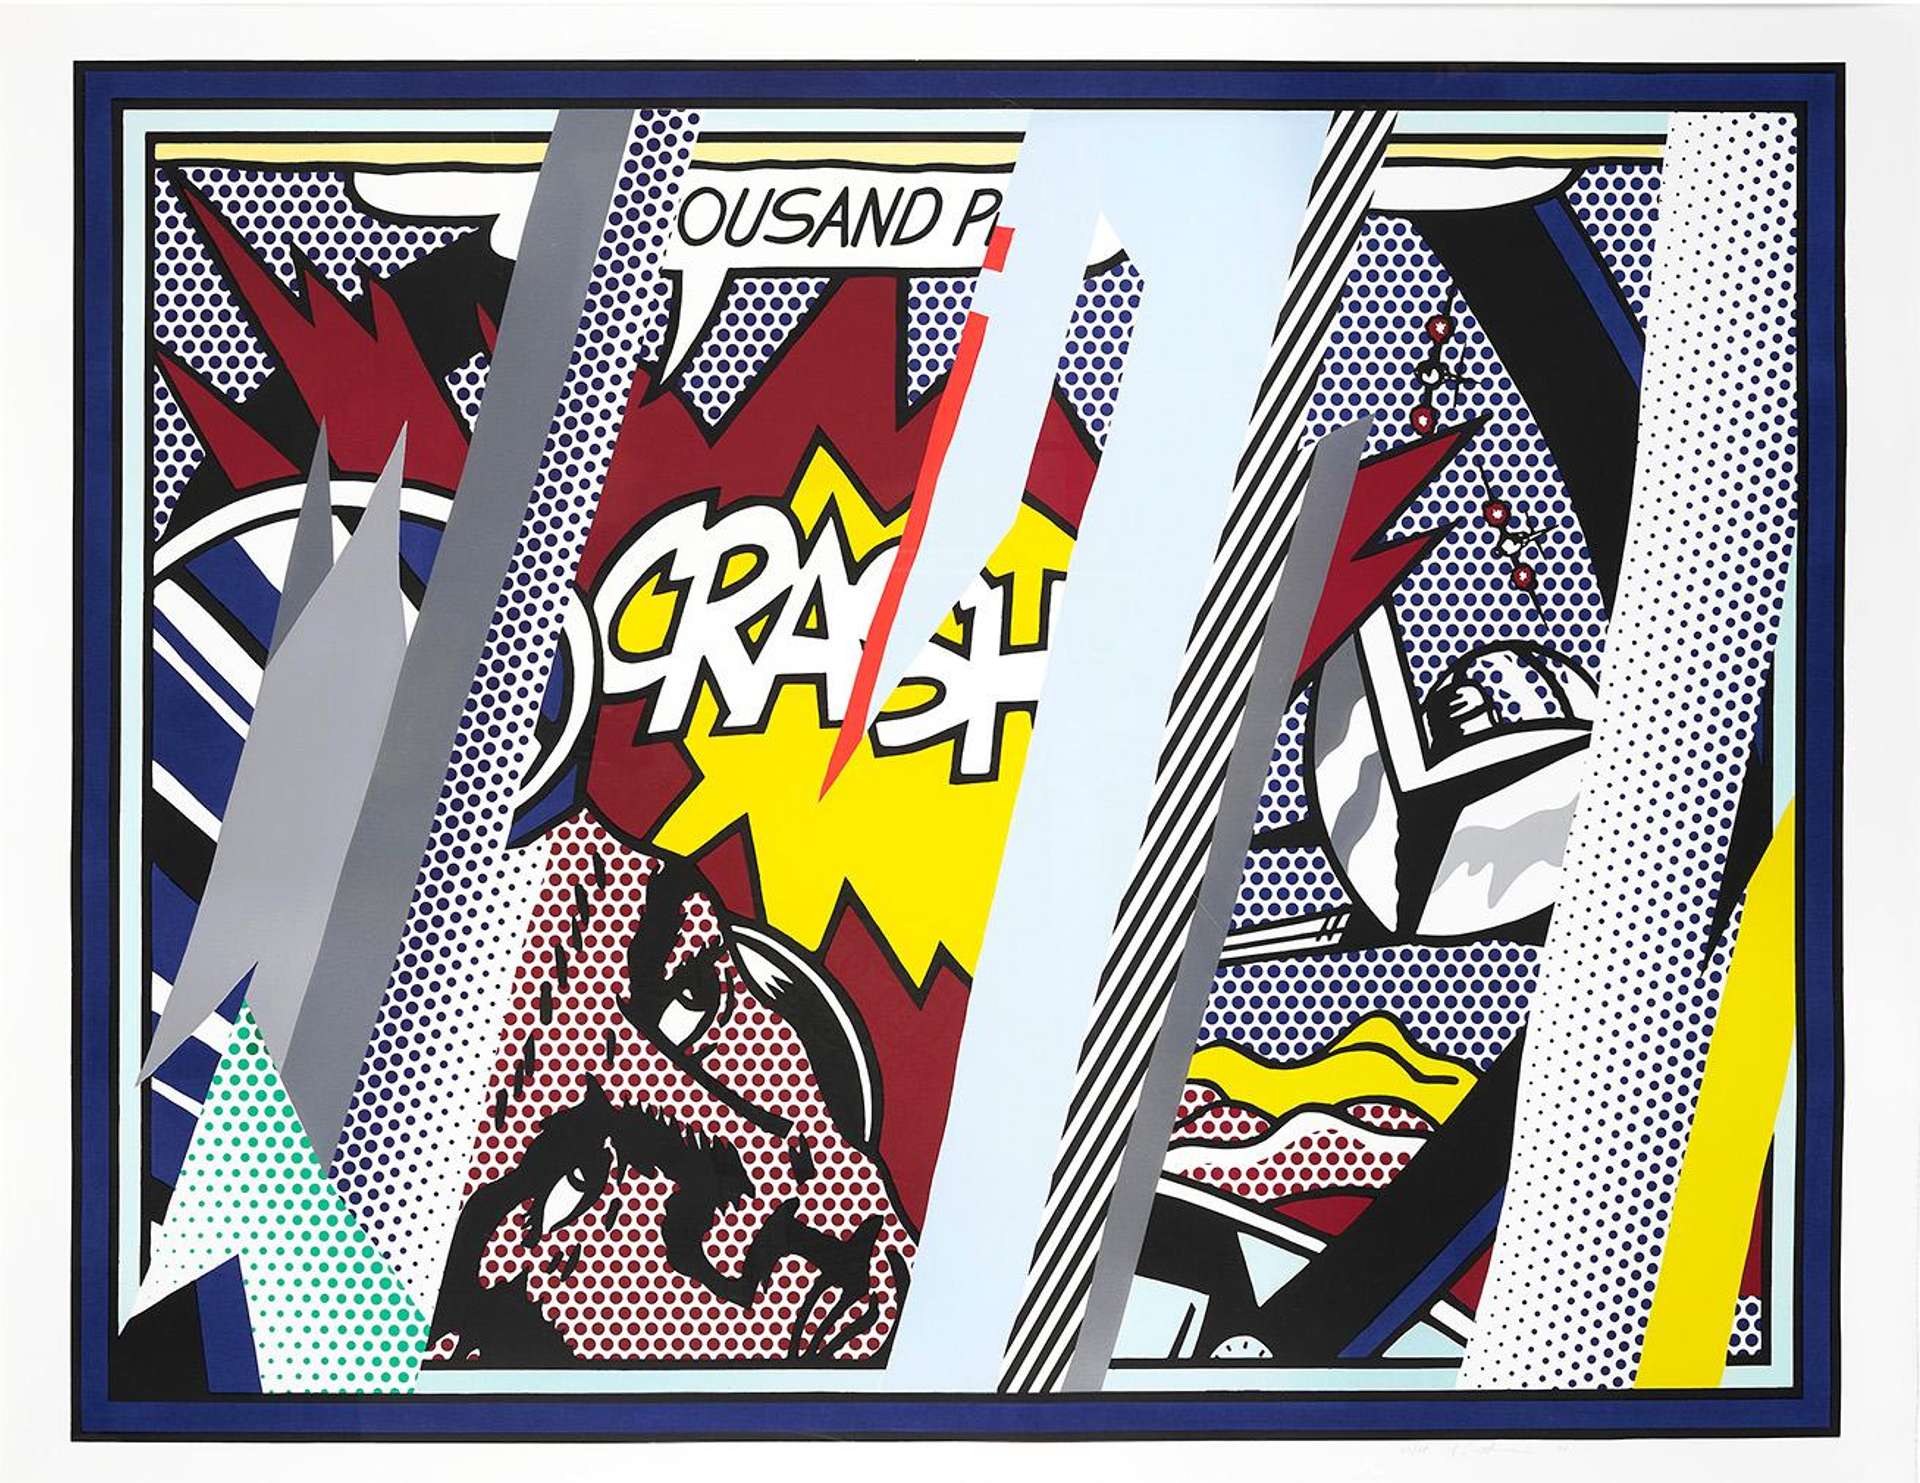 A screenprint by Roy Lichtenstein depicting a scene from a comic book spliced by planes of grey and white, made to look like reflections on the picture plane.